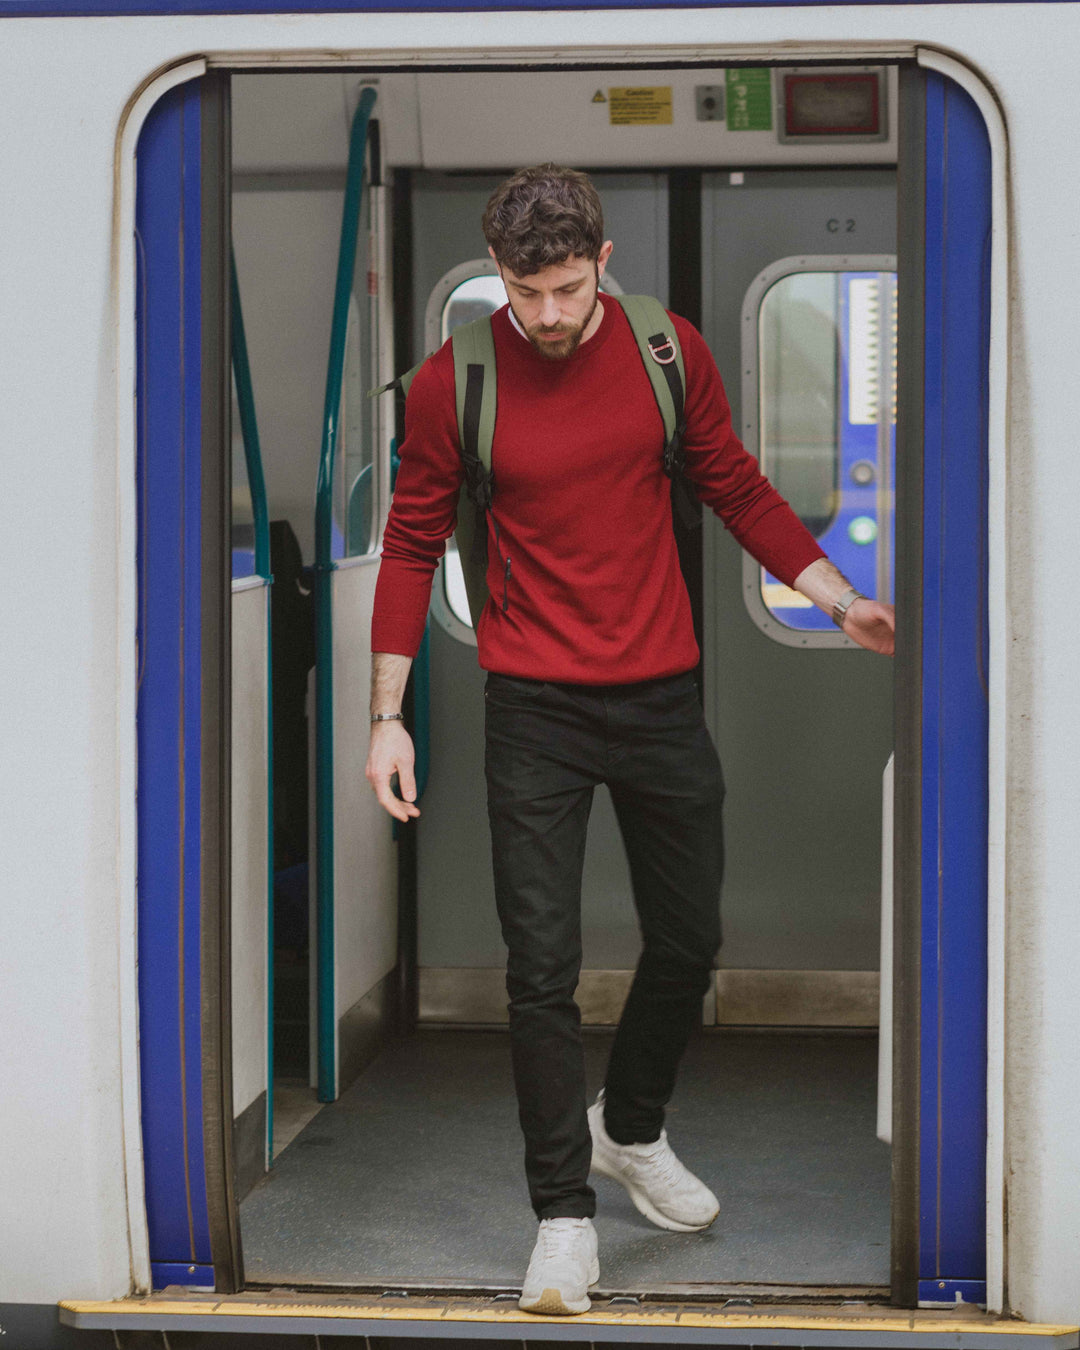 Model commuting on the train wearing our unisex extra-fine merino wool 1/4 zip jumper in maroon red, made from a lightweight fabric and reactive natural fibre. Ideal for layering under our waterproof dry robes for spectating touchdown sports or walking the dog. The perfect addition to any minimalist capsule wardrobe.